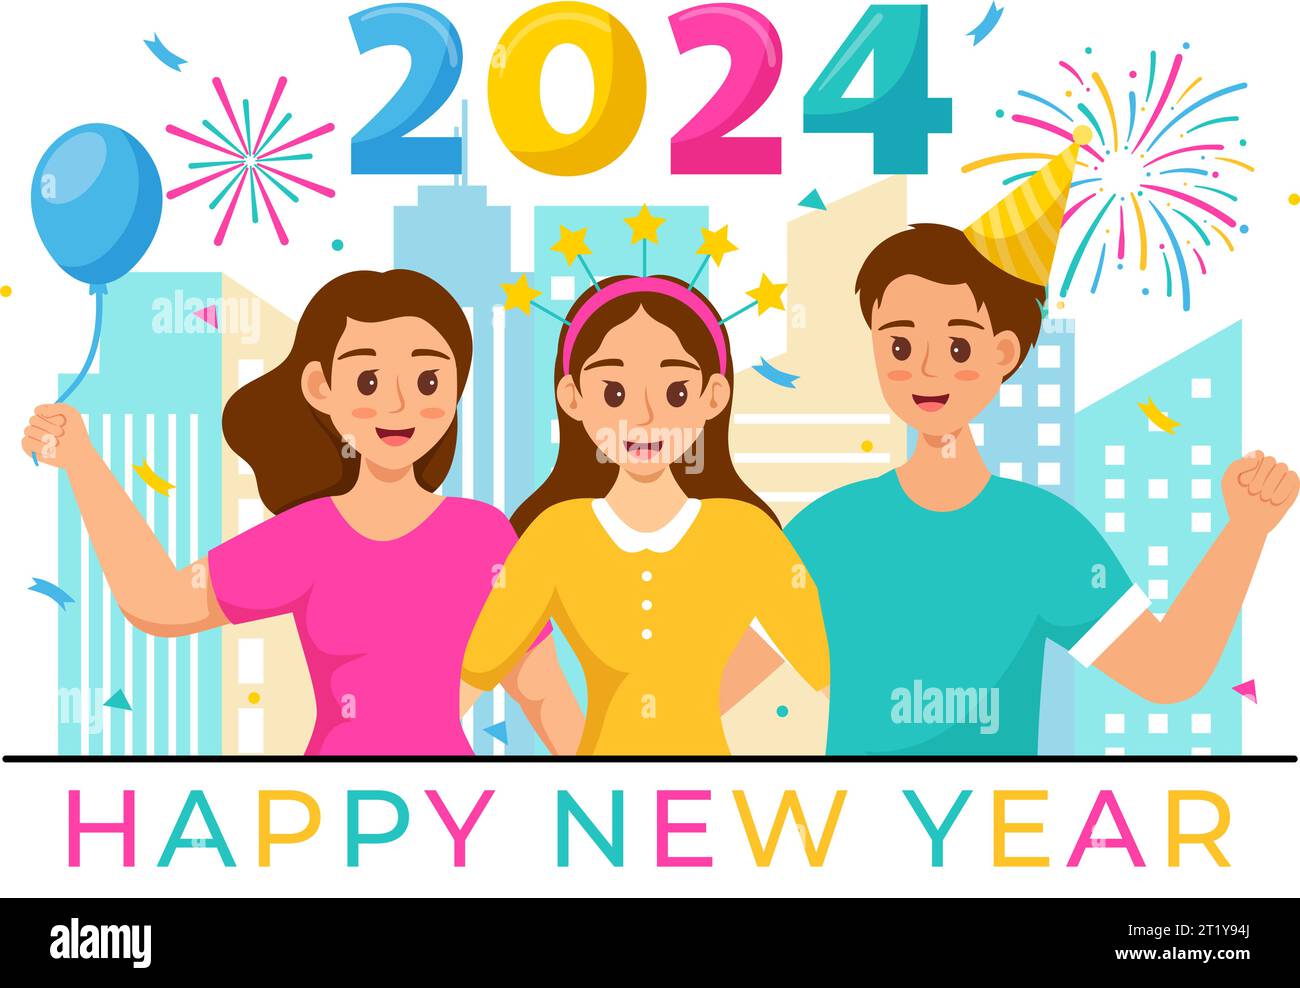 Happy New Year 2024 Celebration Vector Illustration with Trumpet